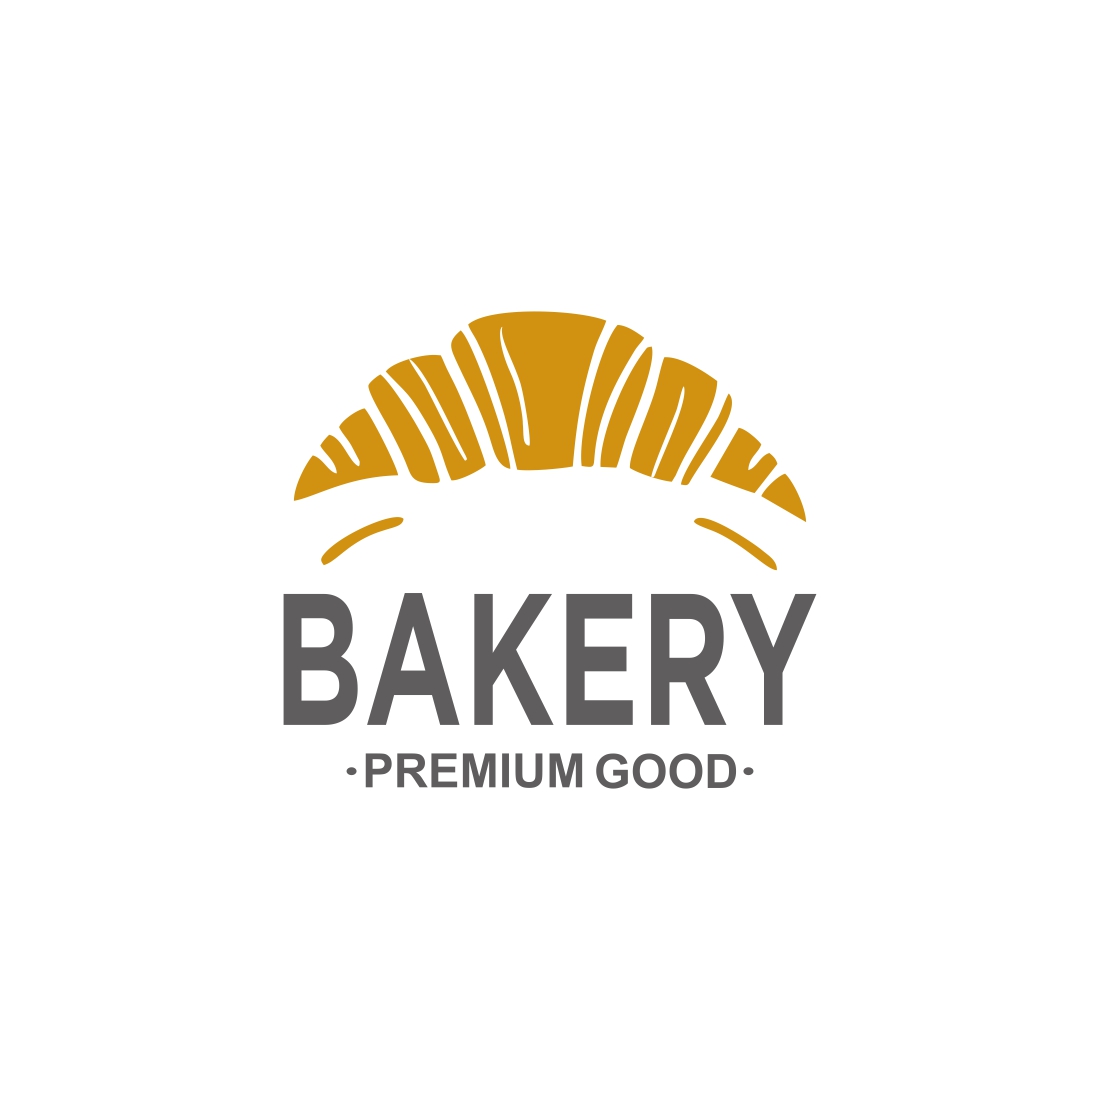 bakery icon design template only 9$ cover image.